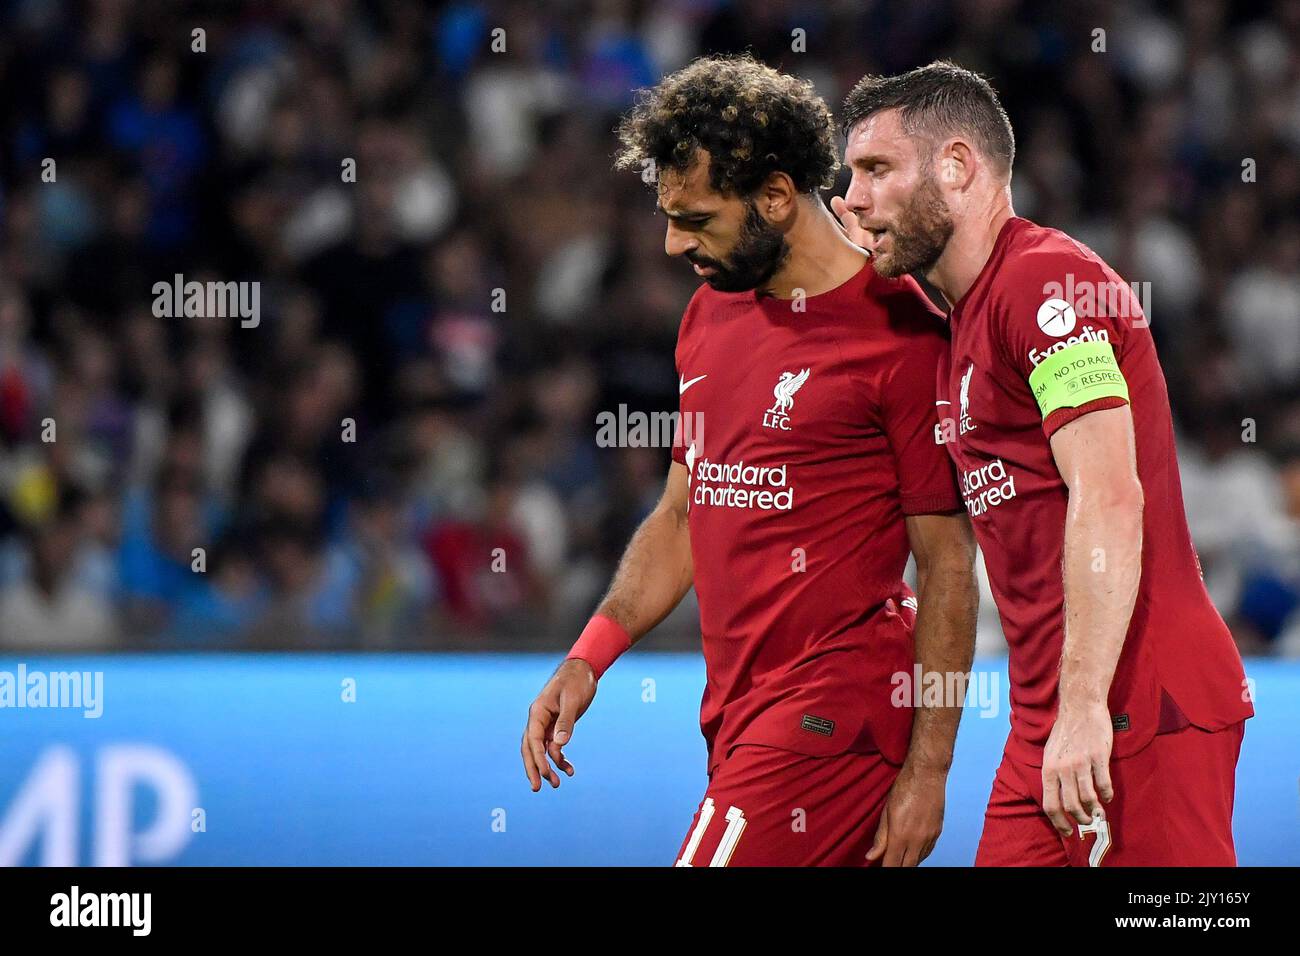 Napoli, Italy. 07th Sep, 2022. Mohamed Salah and James Milner of Liverpool FC during the Champions League Group A football match between SSC Napoli and Liverpool FC at Diego Armando Maradona stadium in Napoli (Italy), September 7th, 2022. Photo Andrea Staccioli/Insidefoto Credit: Insidefoto di andrea staccioli/Alamy Live News Stock Photo